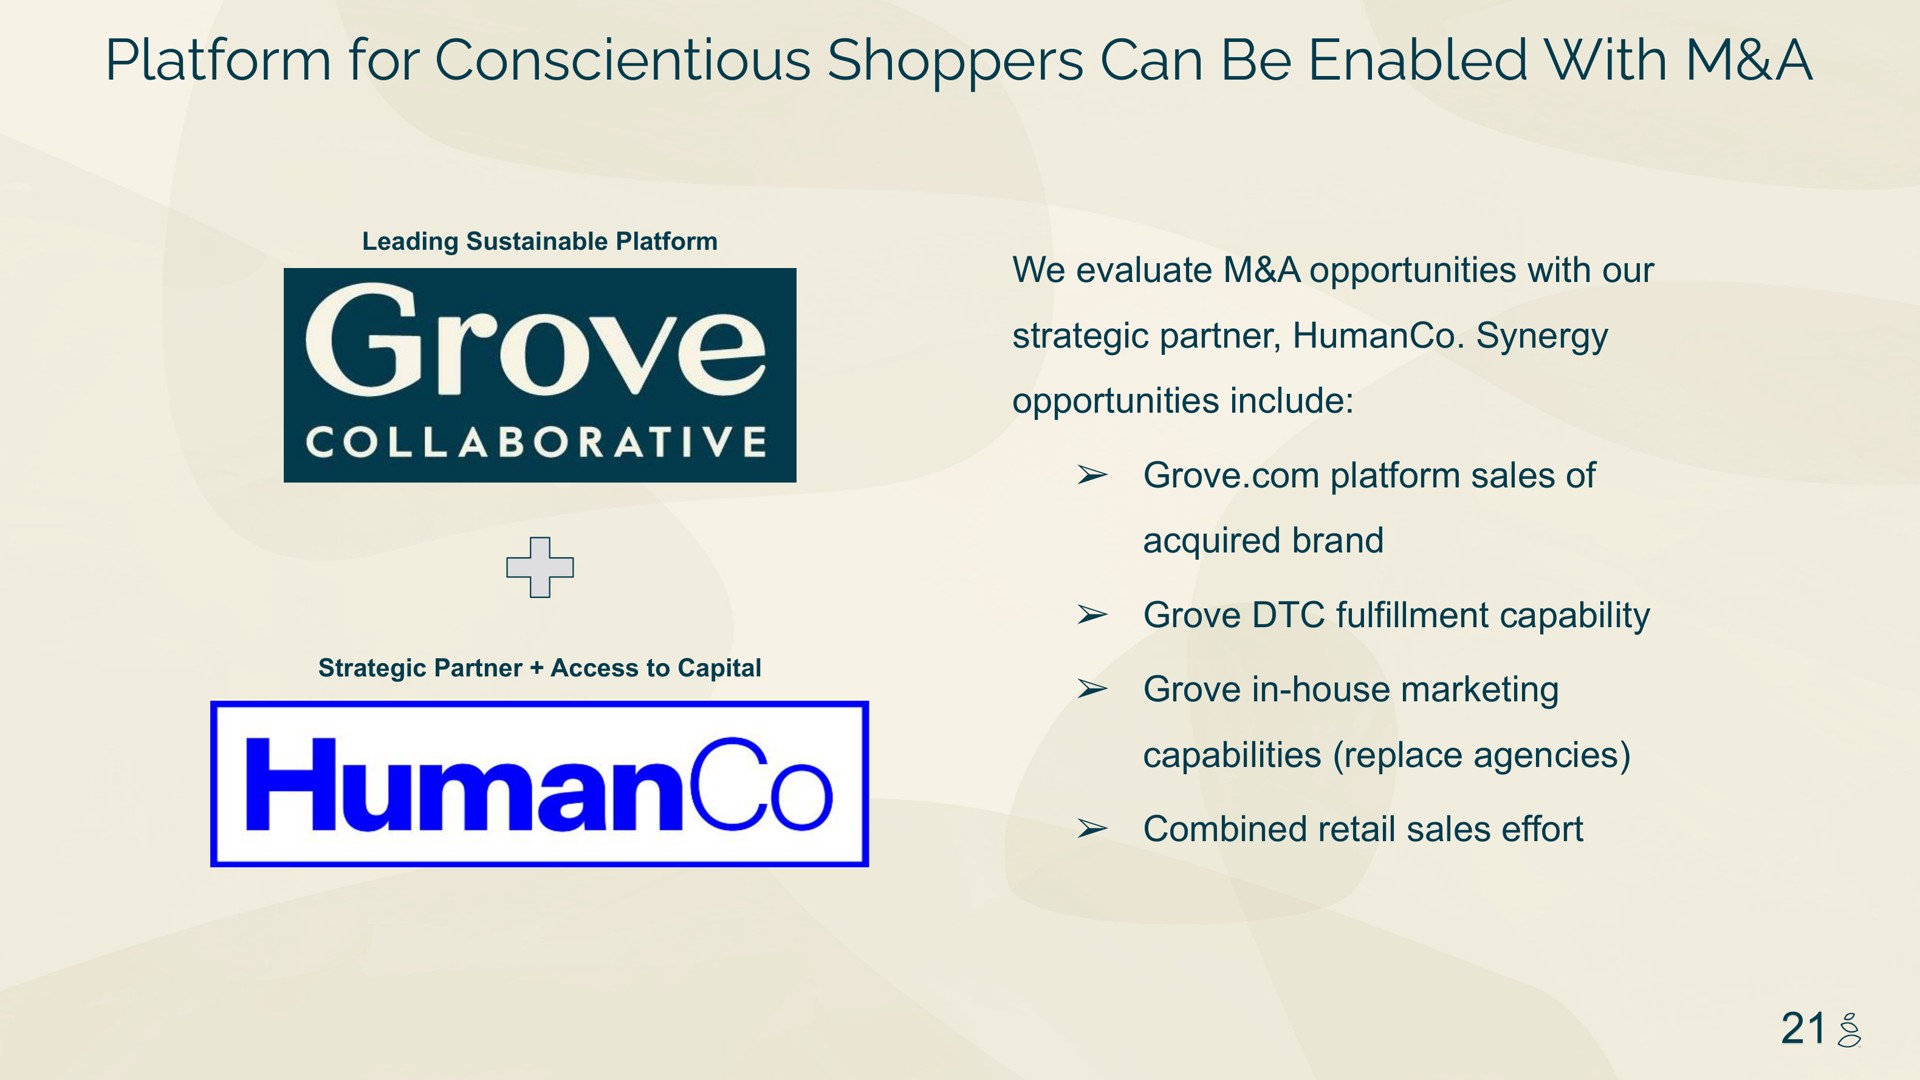 platform for conscientious shoppers can be enabled with a we evaluate a opportunities with our strategic partner synergy opportunities include grove platform sales of acquired brand grove fulfillment capability grove in house marketing capabilities replace agencies combined retail sales effort | Grove